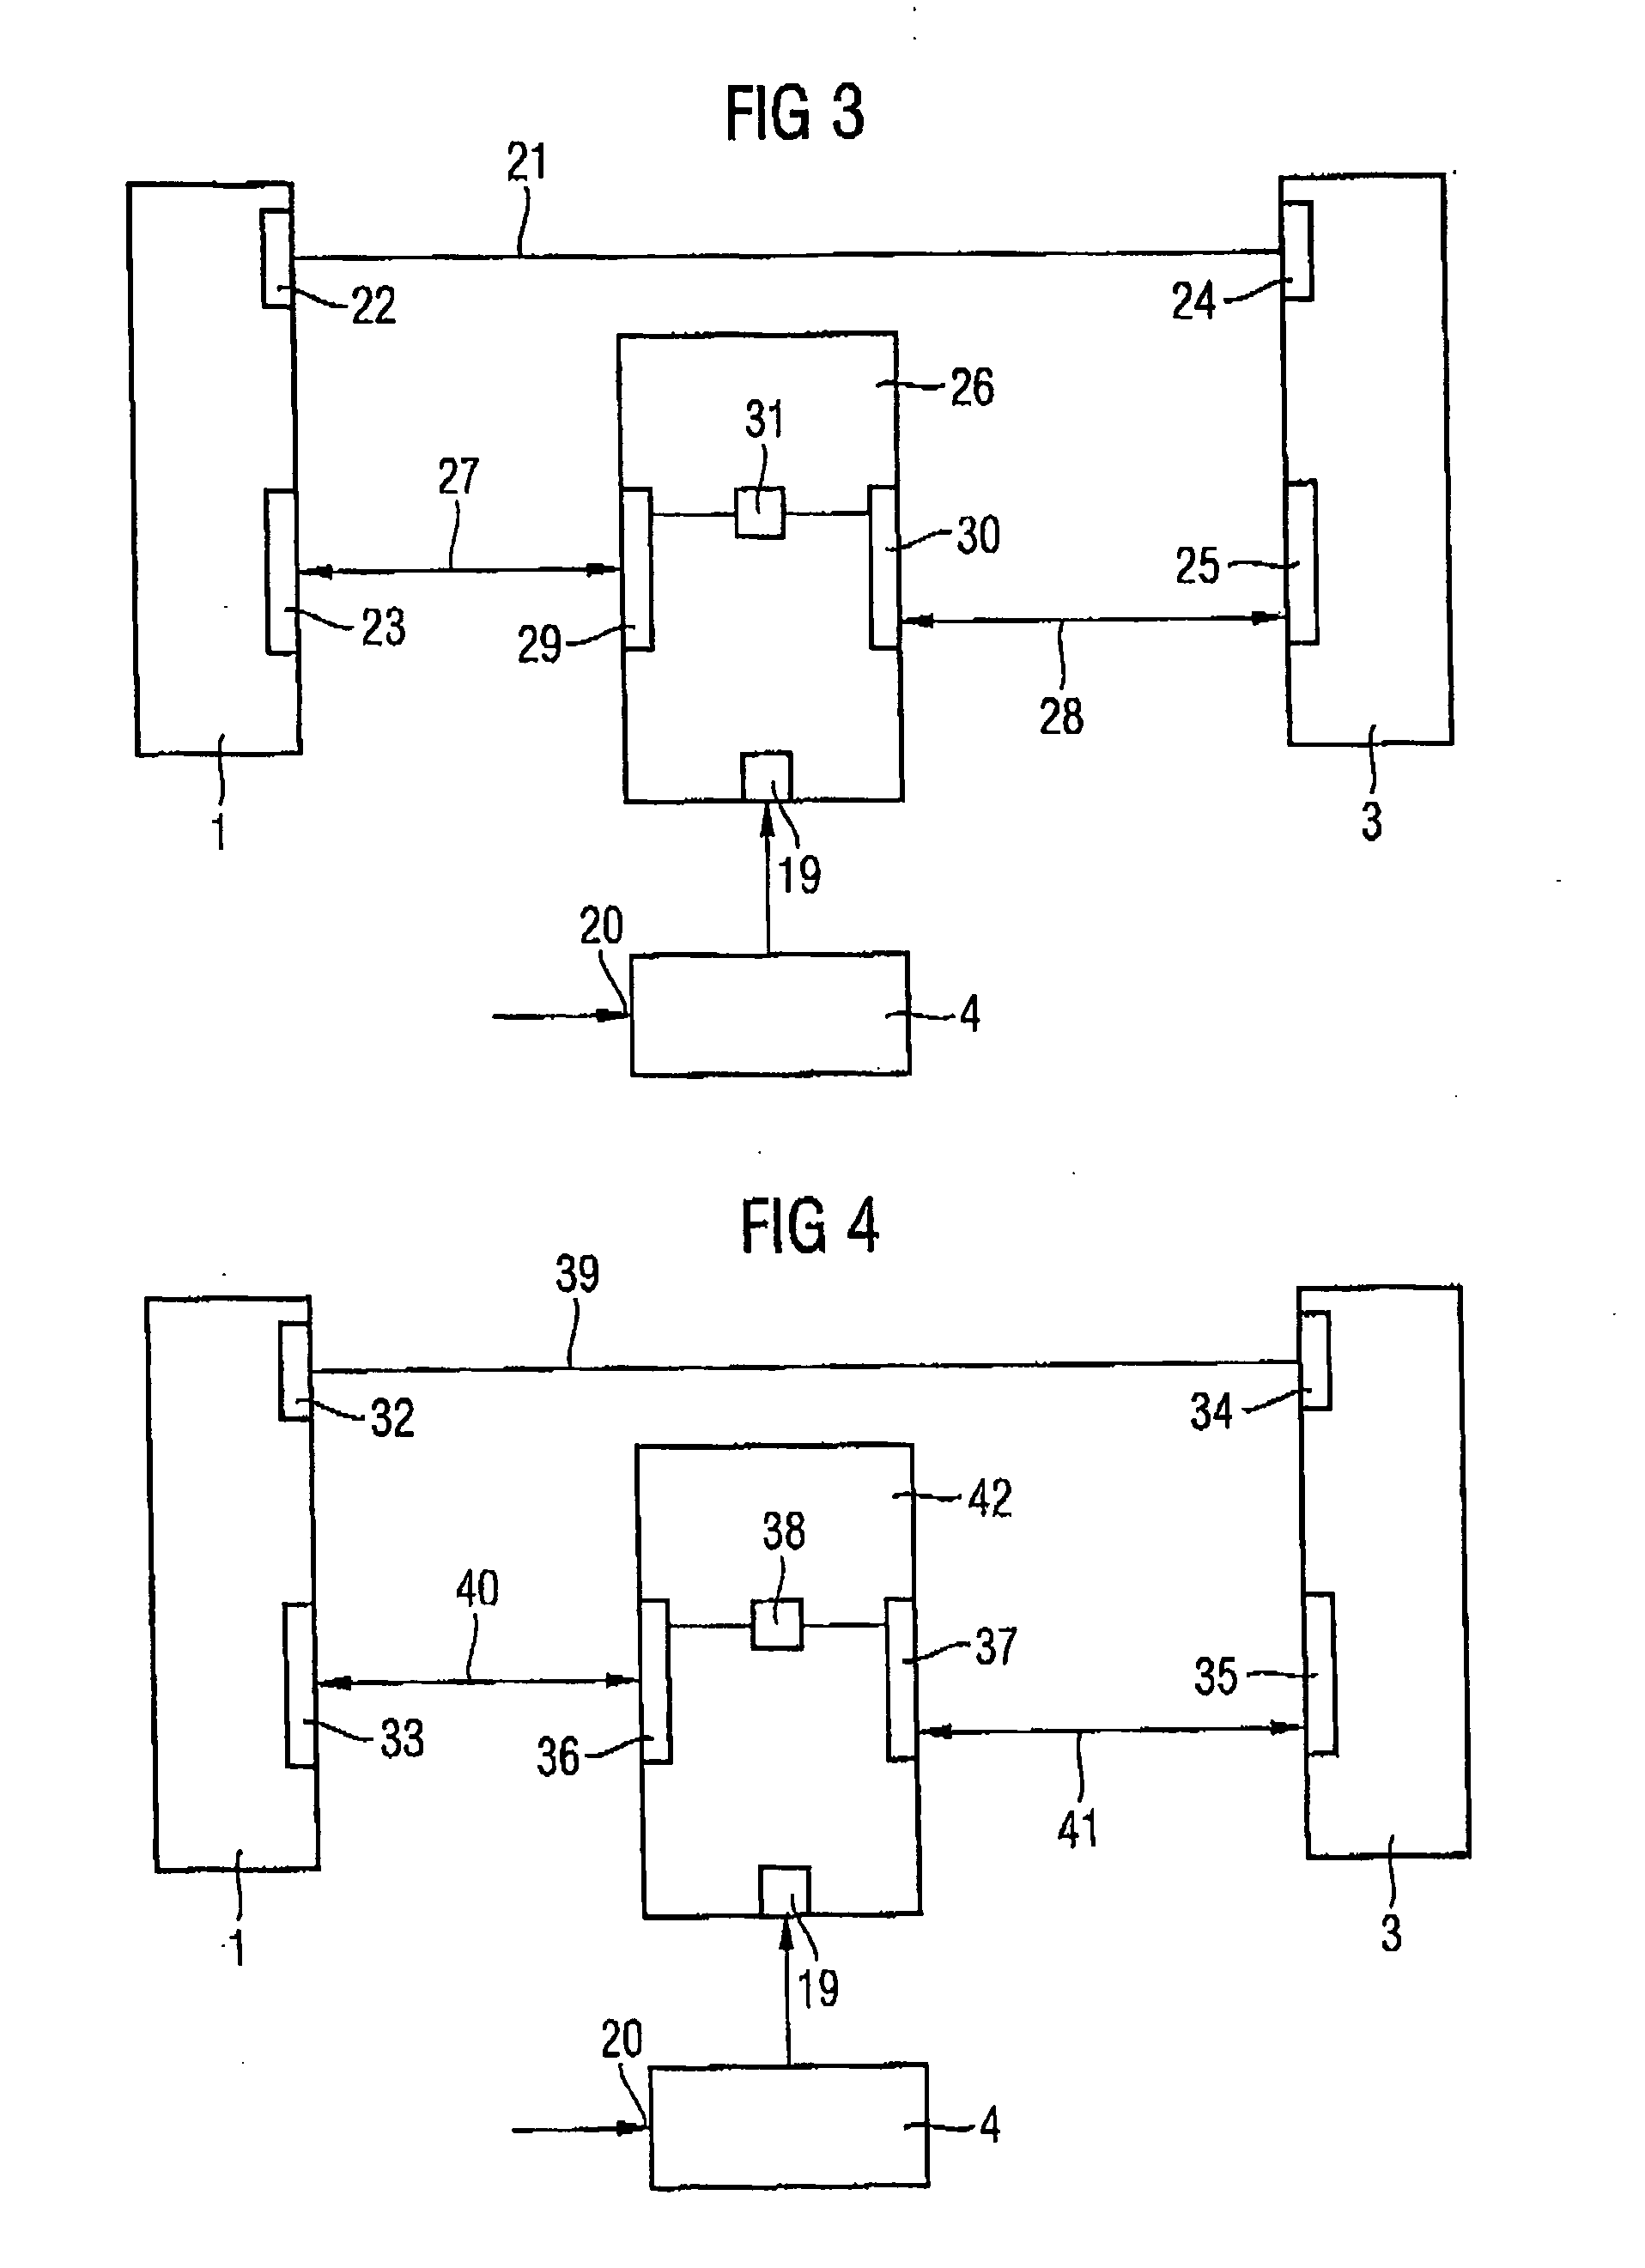 Memory system with a retiming circuit and a method of exchanging data and timing signals between a memory controller and a memory device